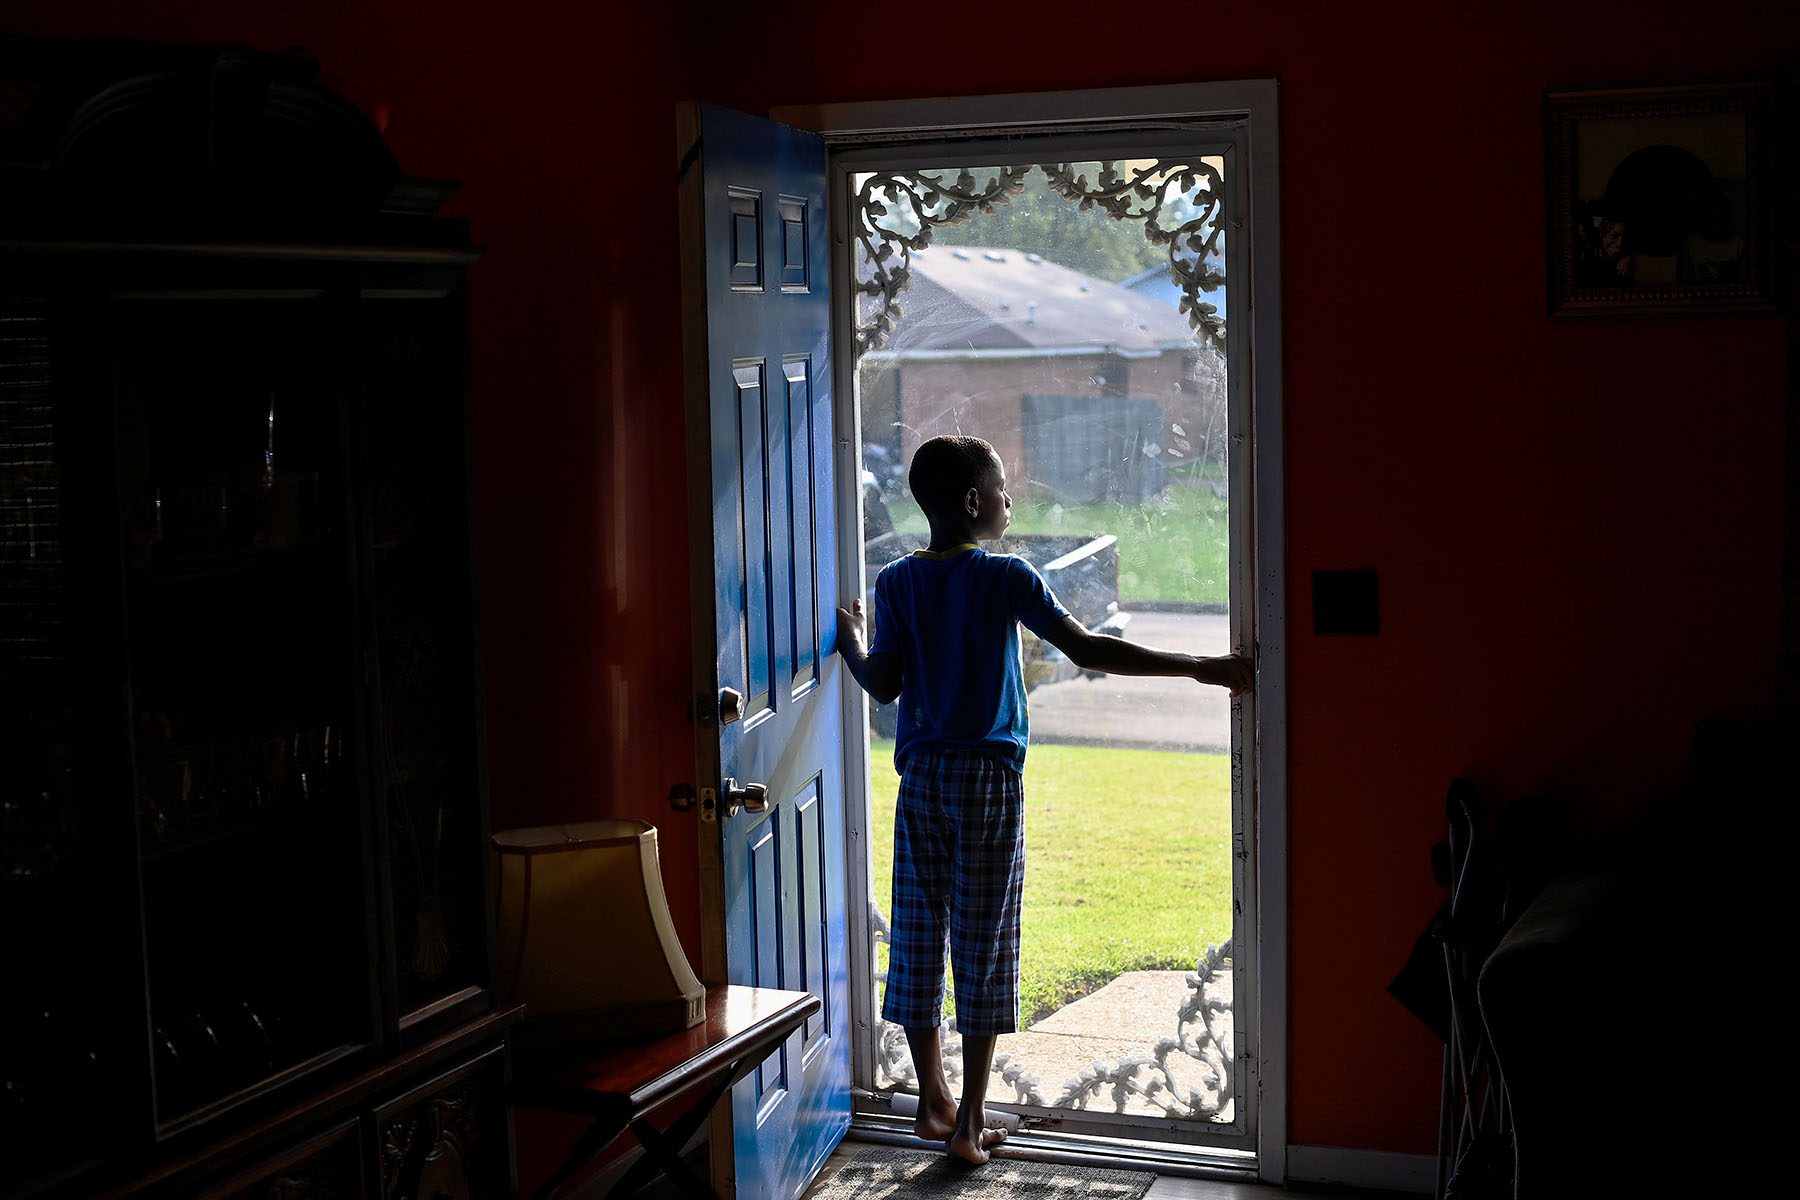 Without clean water, parents in Jackson, Mississippi, struggle to provide - The 19th*